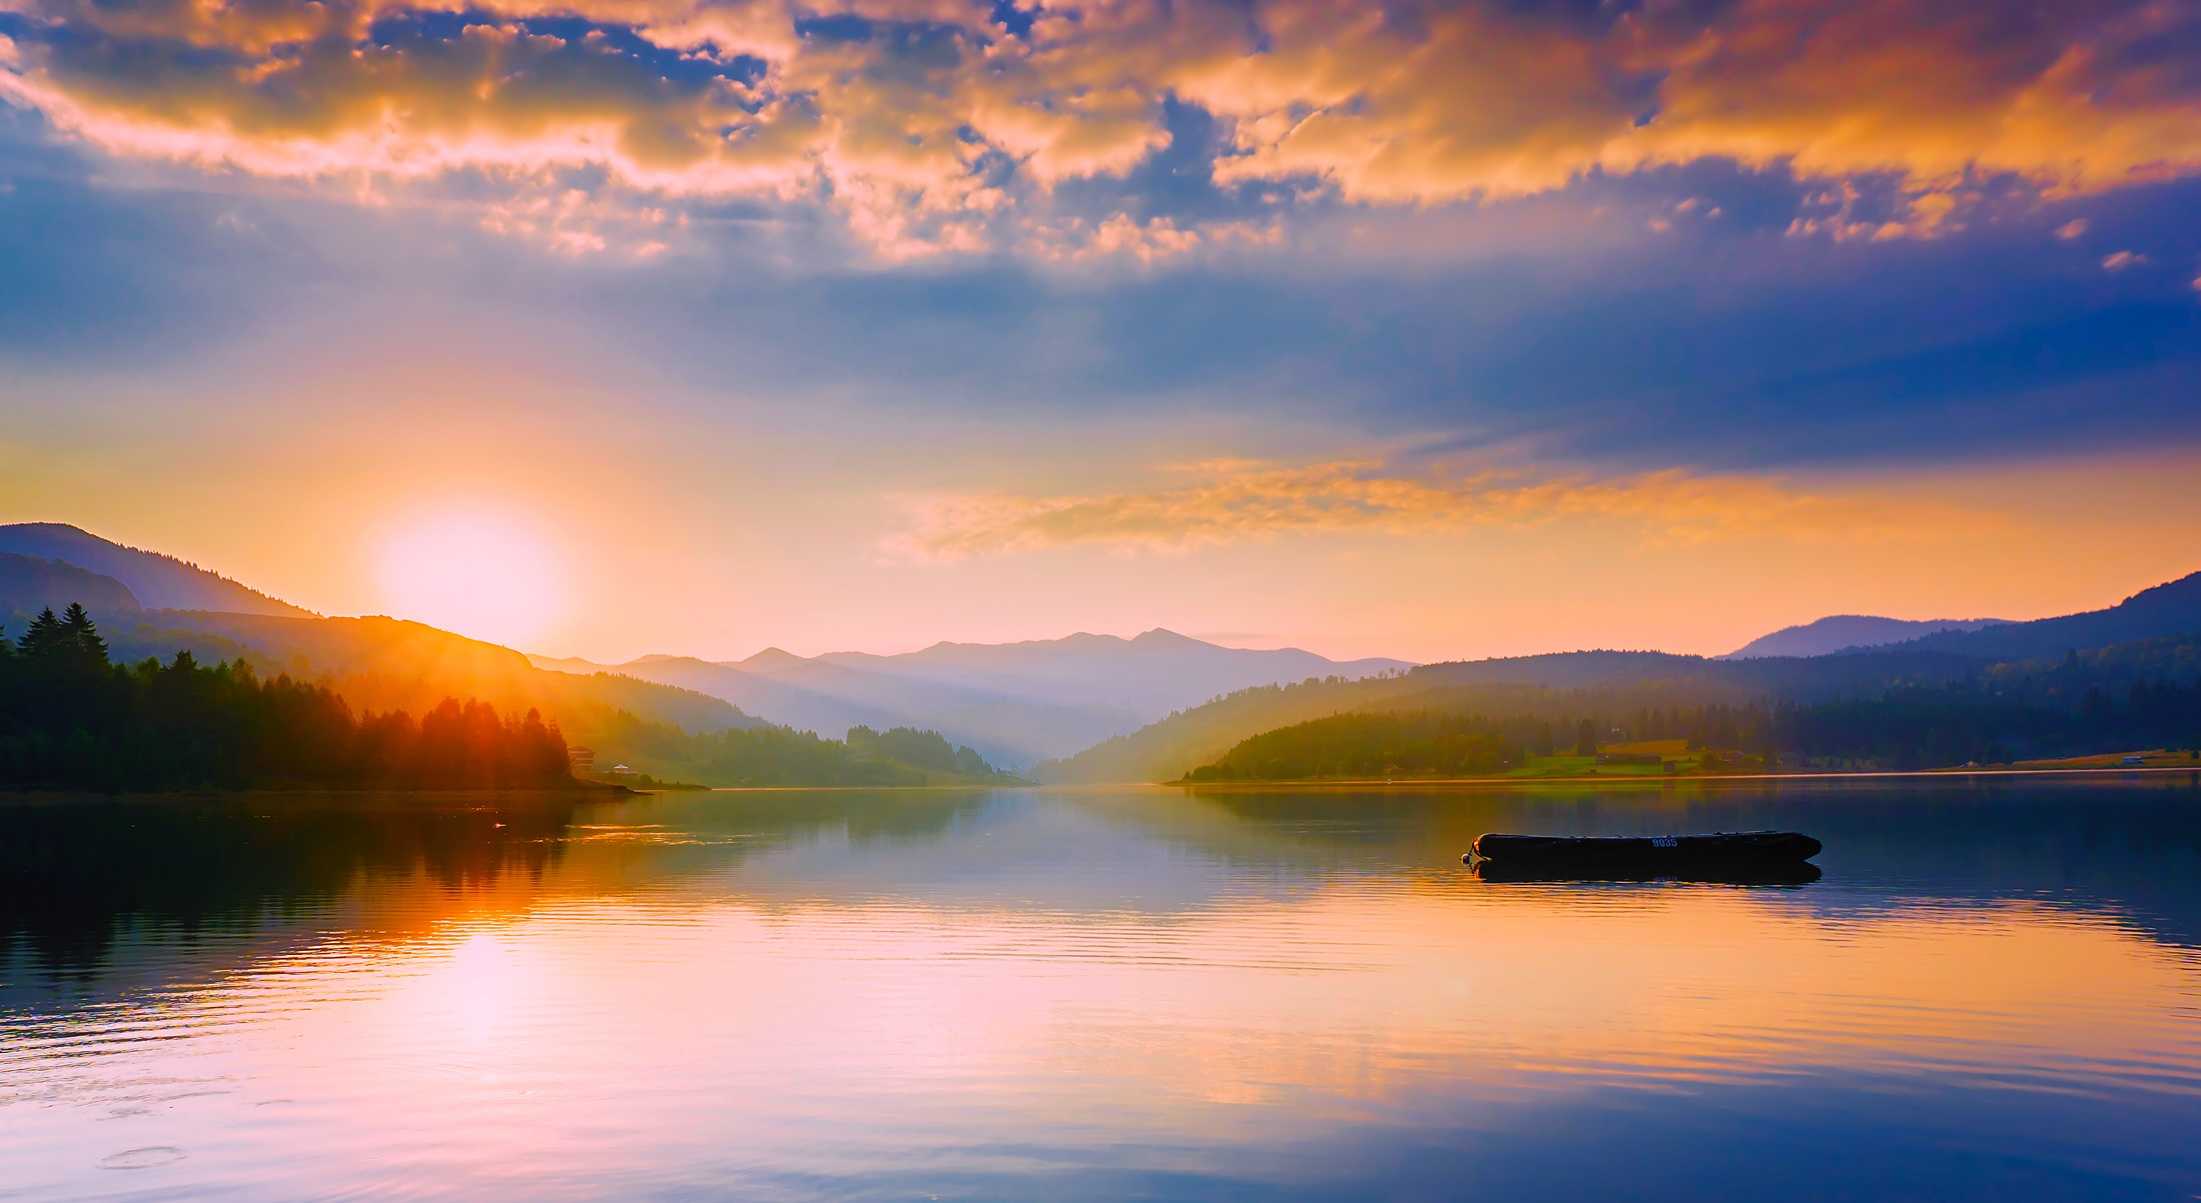                               35+ Stunning Sunrise Photos That Will Make You Wake up Early Morning                             
                              